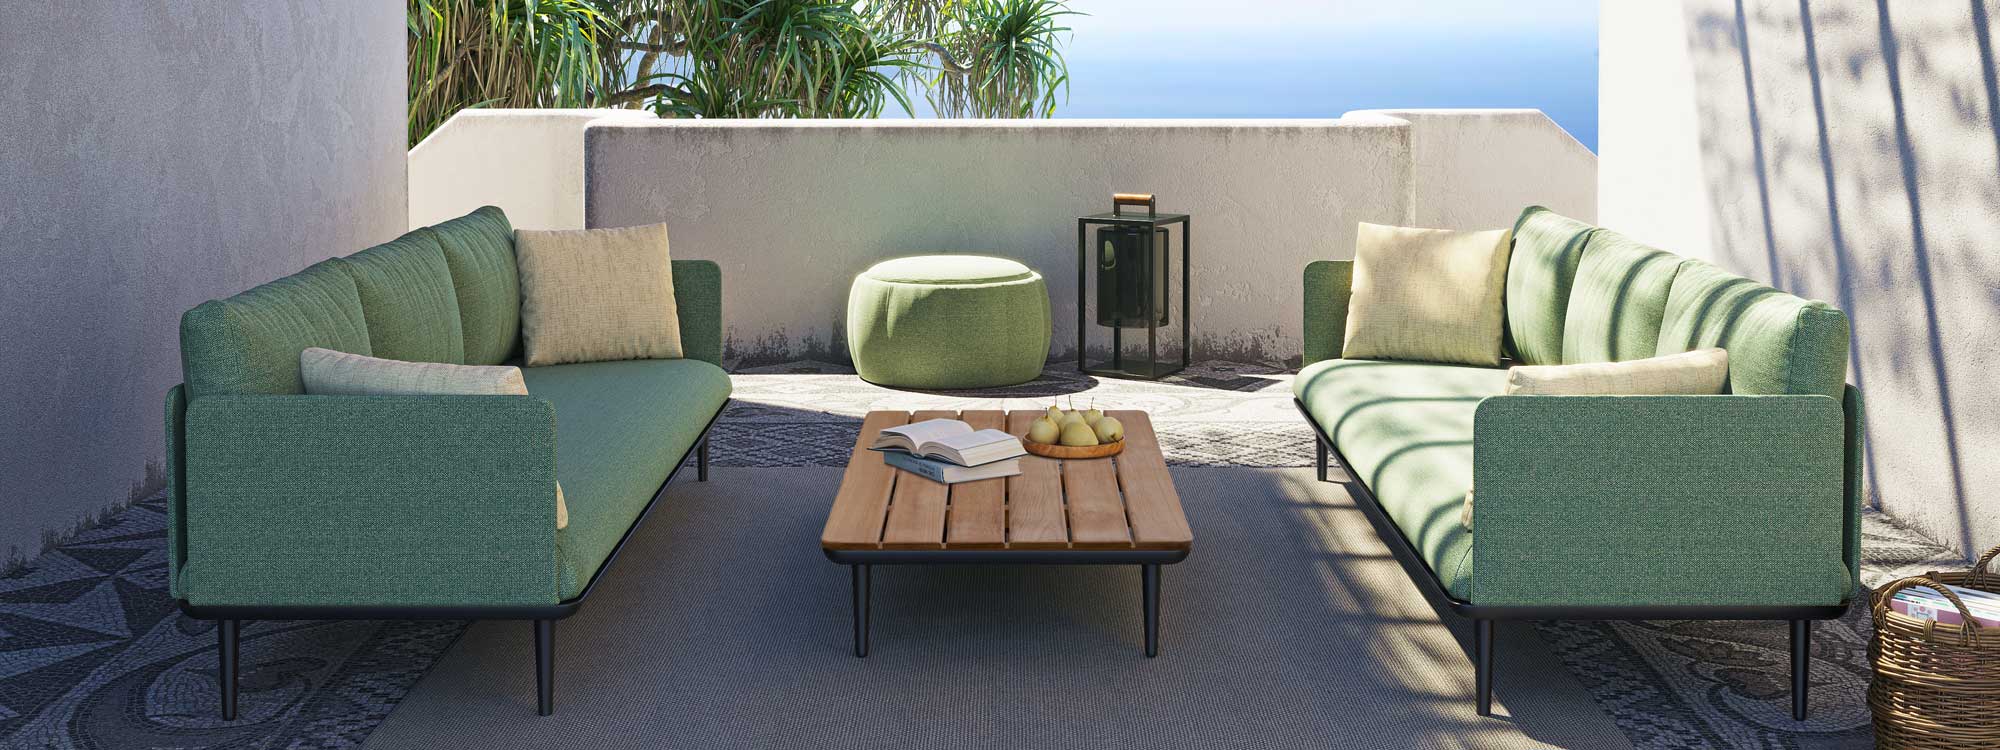 Image of Styletto olive green garden sofas on carpeted outdoor terrace with azure sea in background